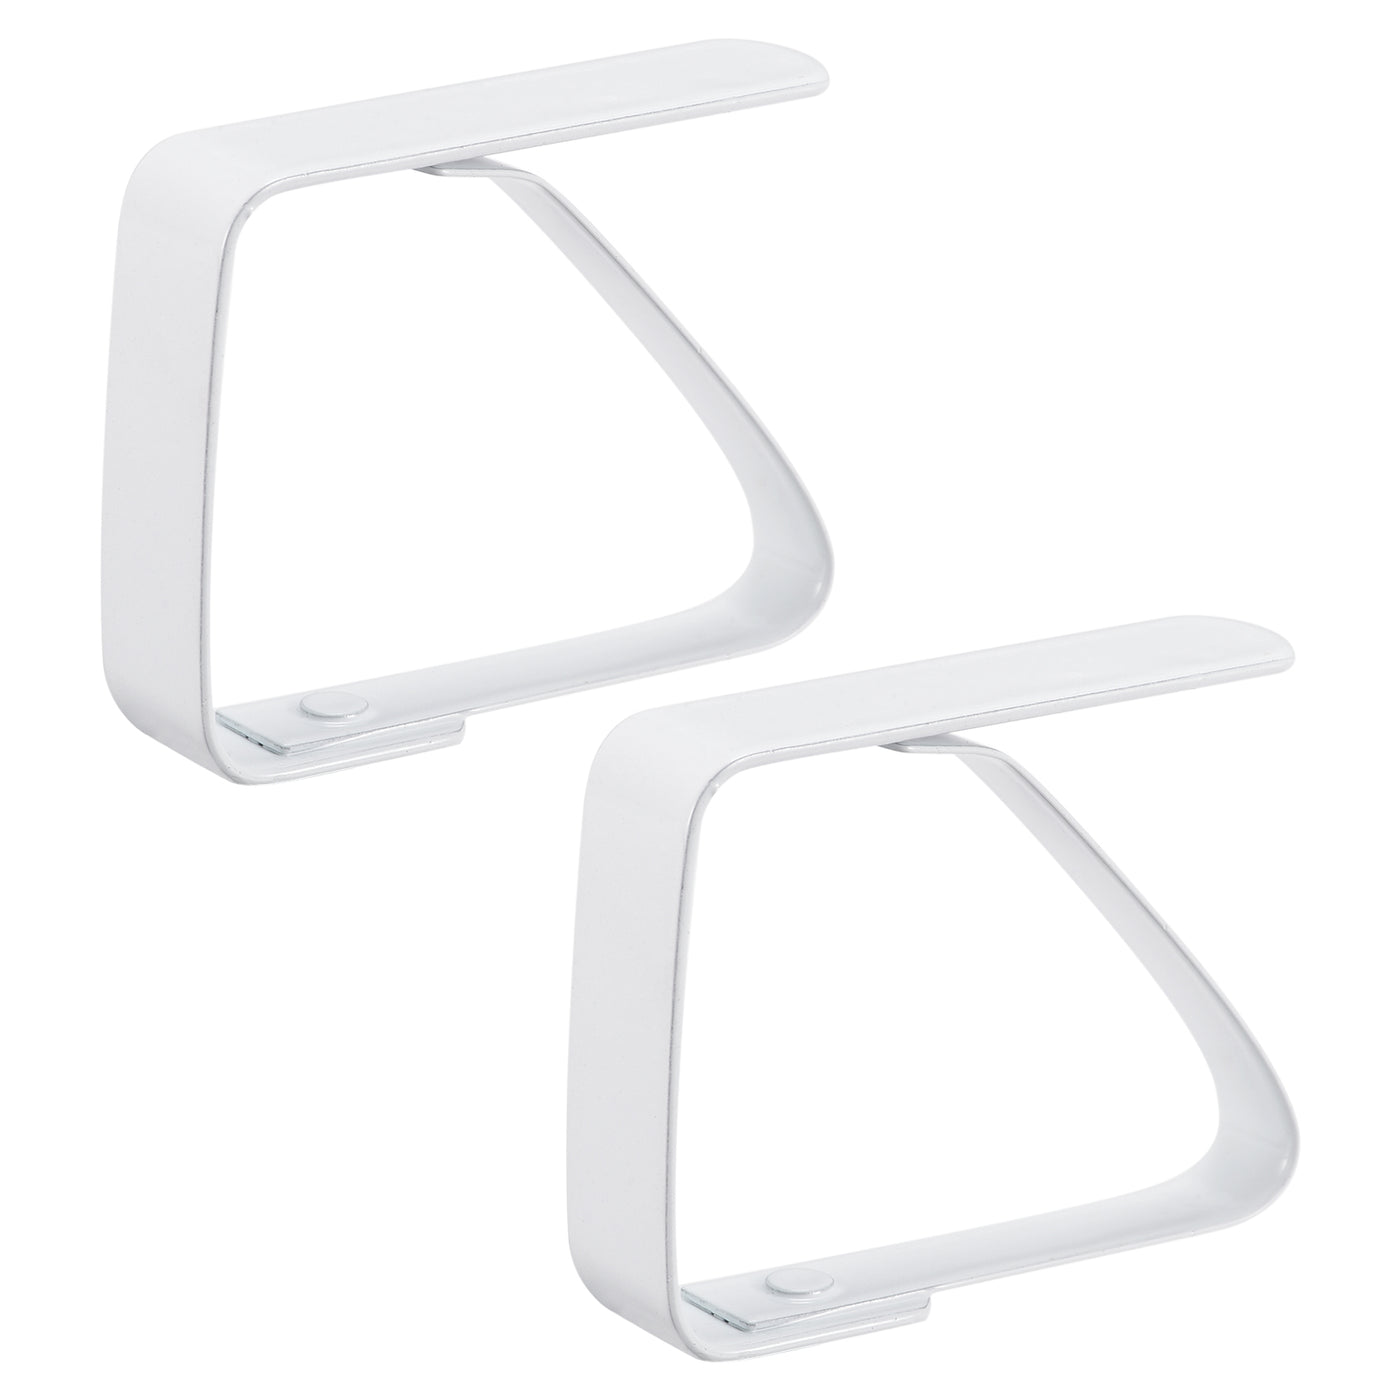 uxcell Uxcell Tablecloth Clips 50mm x 40mm 420 Stainless Steel Table Cloth Holder White 2 Pcs